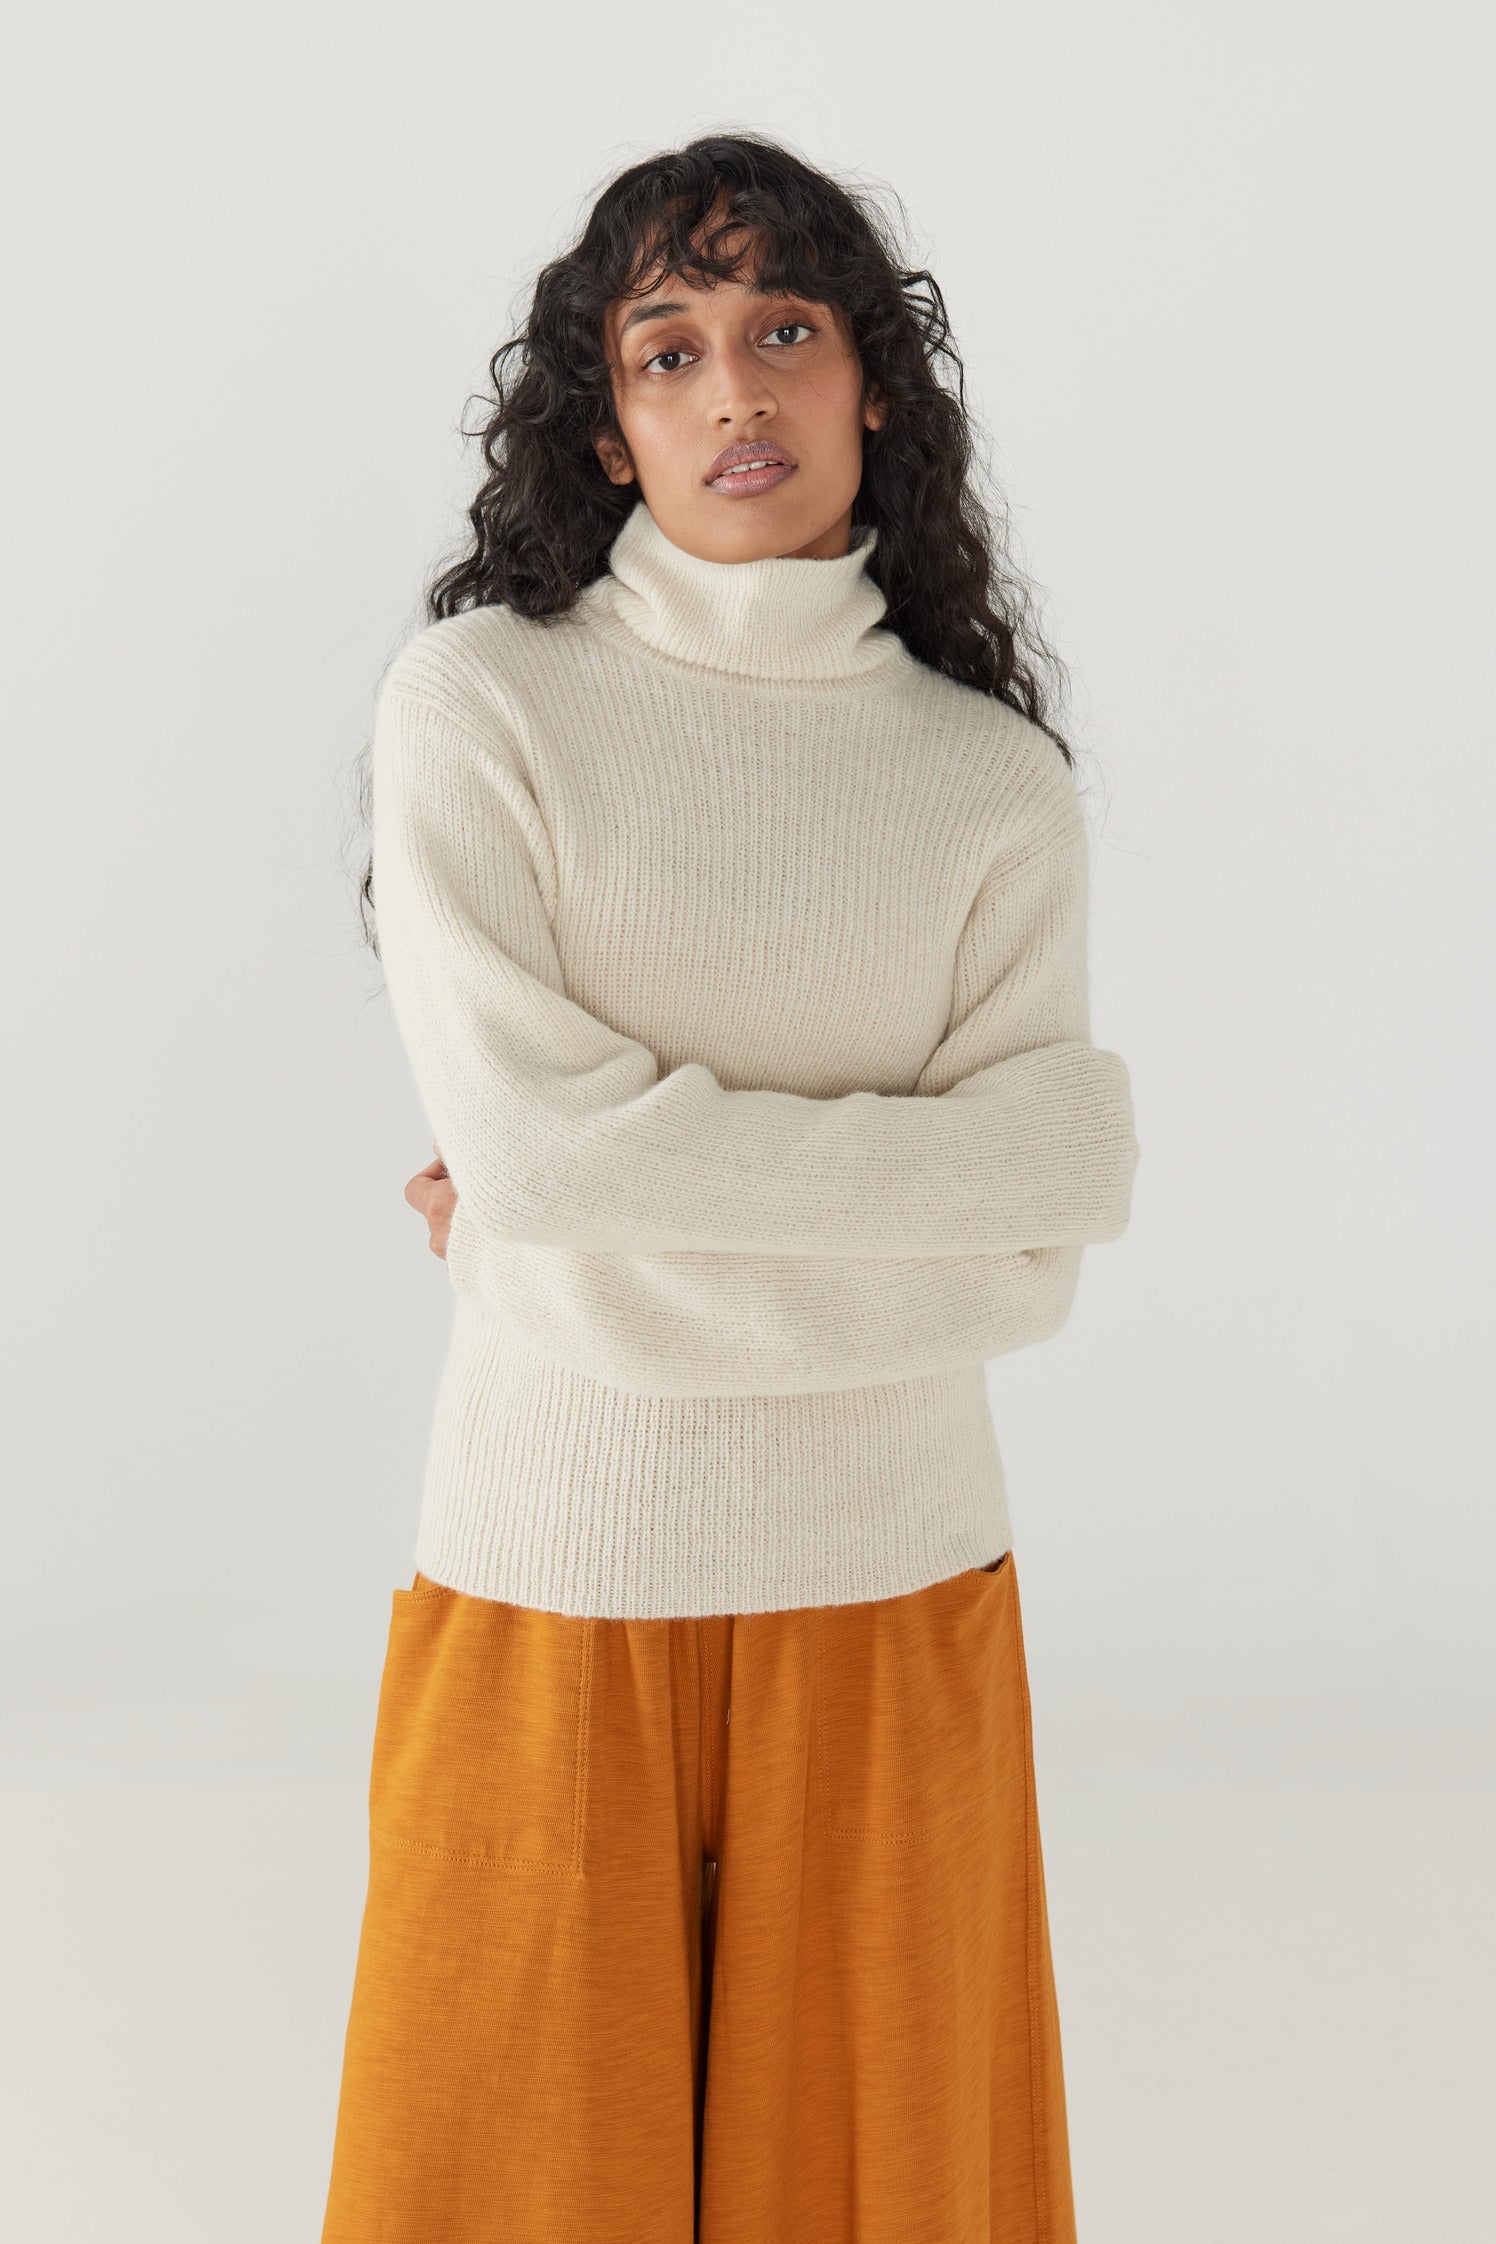 Adult Natural Alpaca Gallery Turtleneck - Pearl+Model is 5'9" | 31" Bust | 24" Waist | 34" Hips | size 2, wearing a size Medium